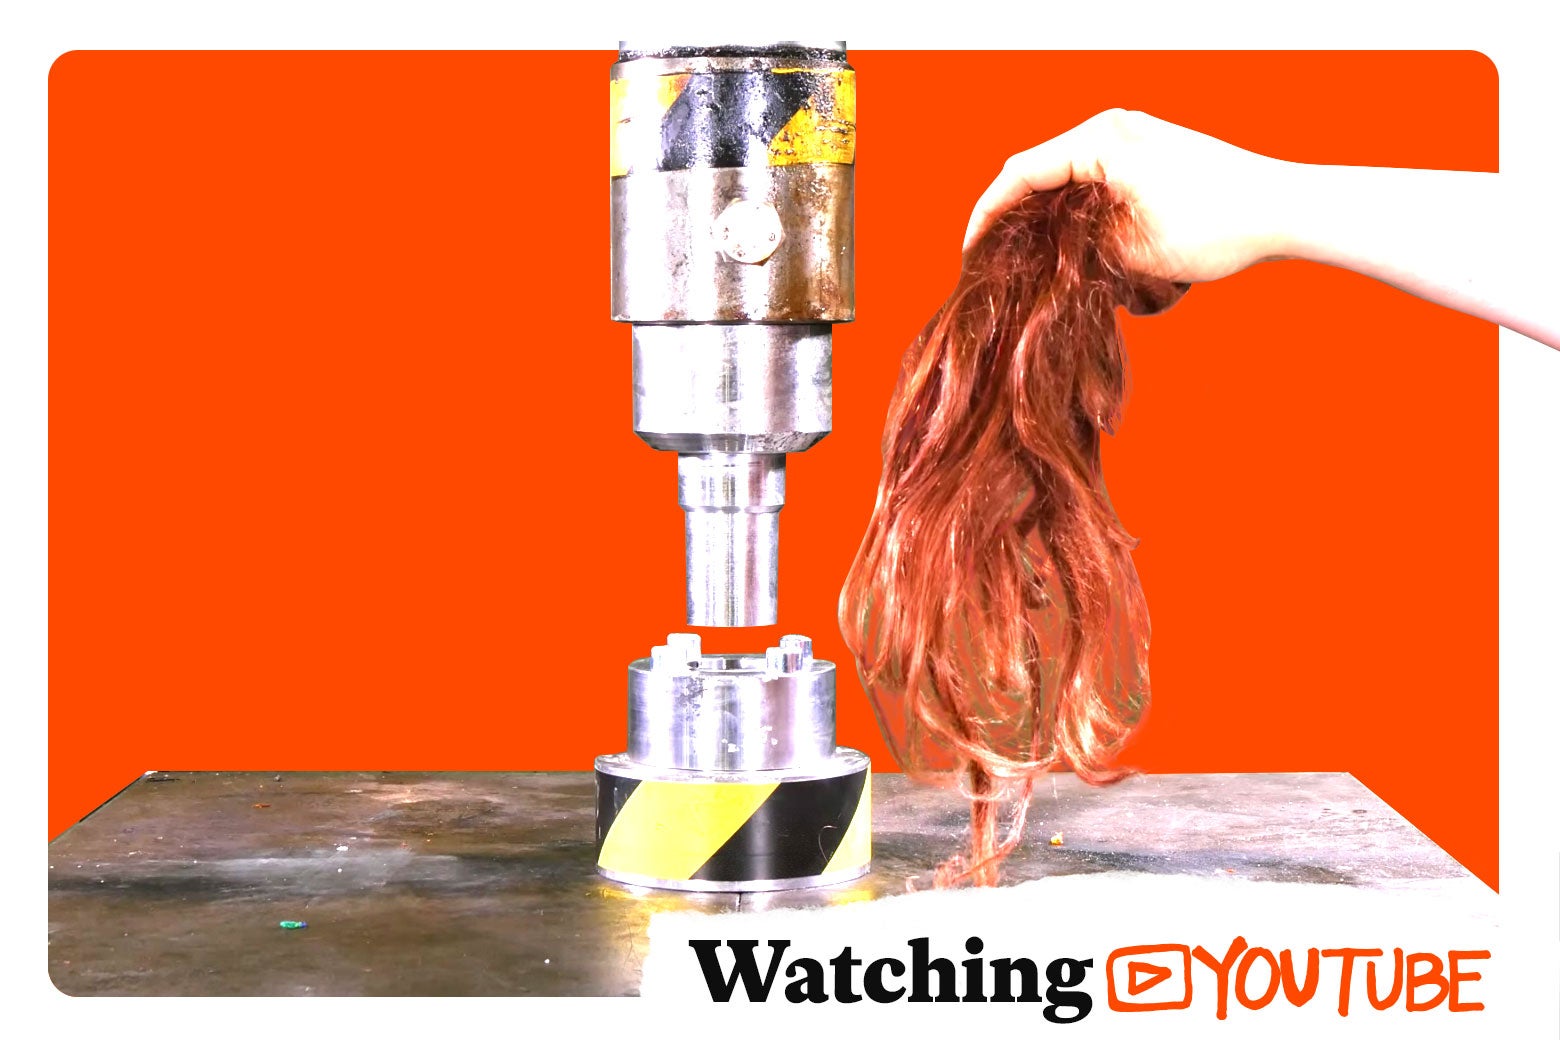 Photo illustration: a still from the Hydraulic Press YouTube channel with the Watching YouTube logo superimposed.